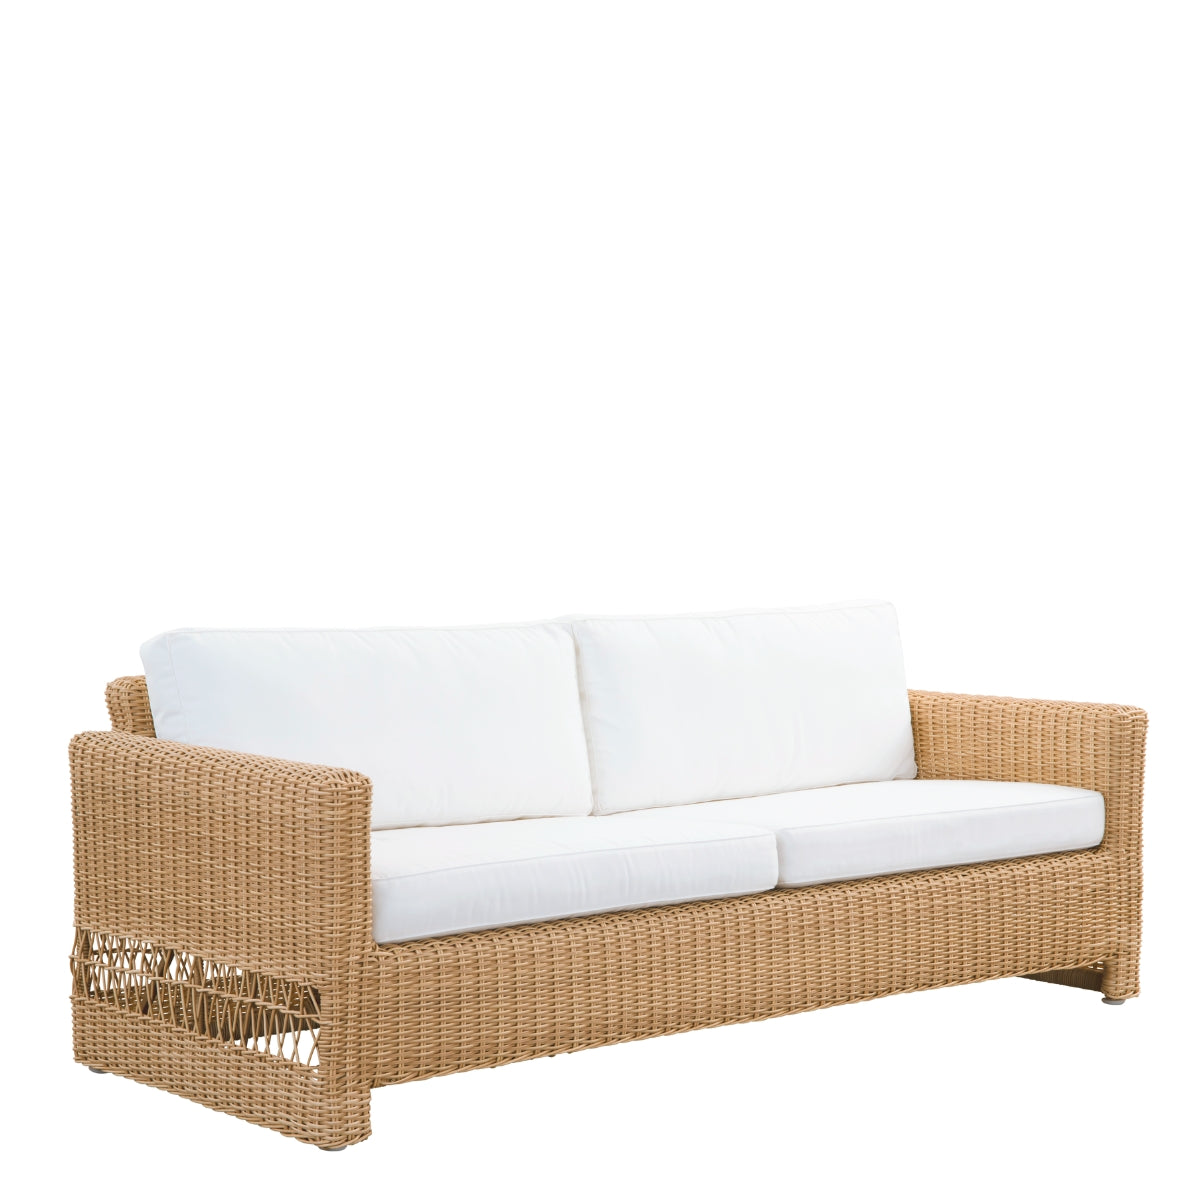 Sika-Design | Carrie 3 pers. Sofa - Outdoor